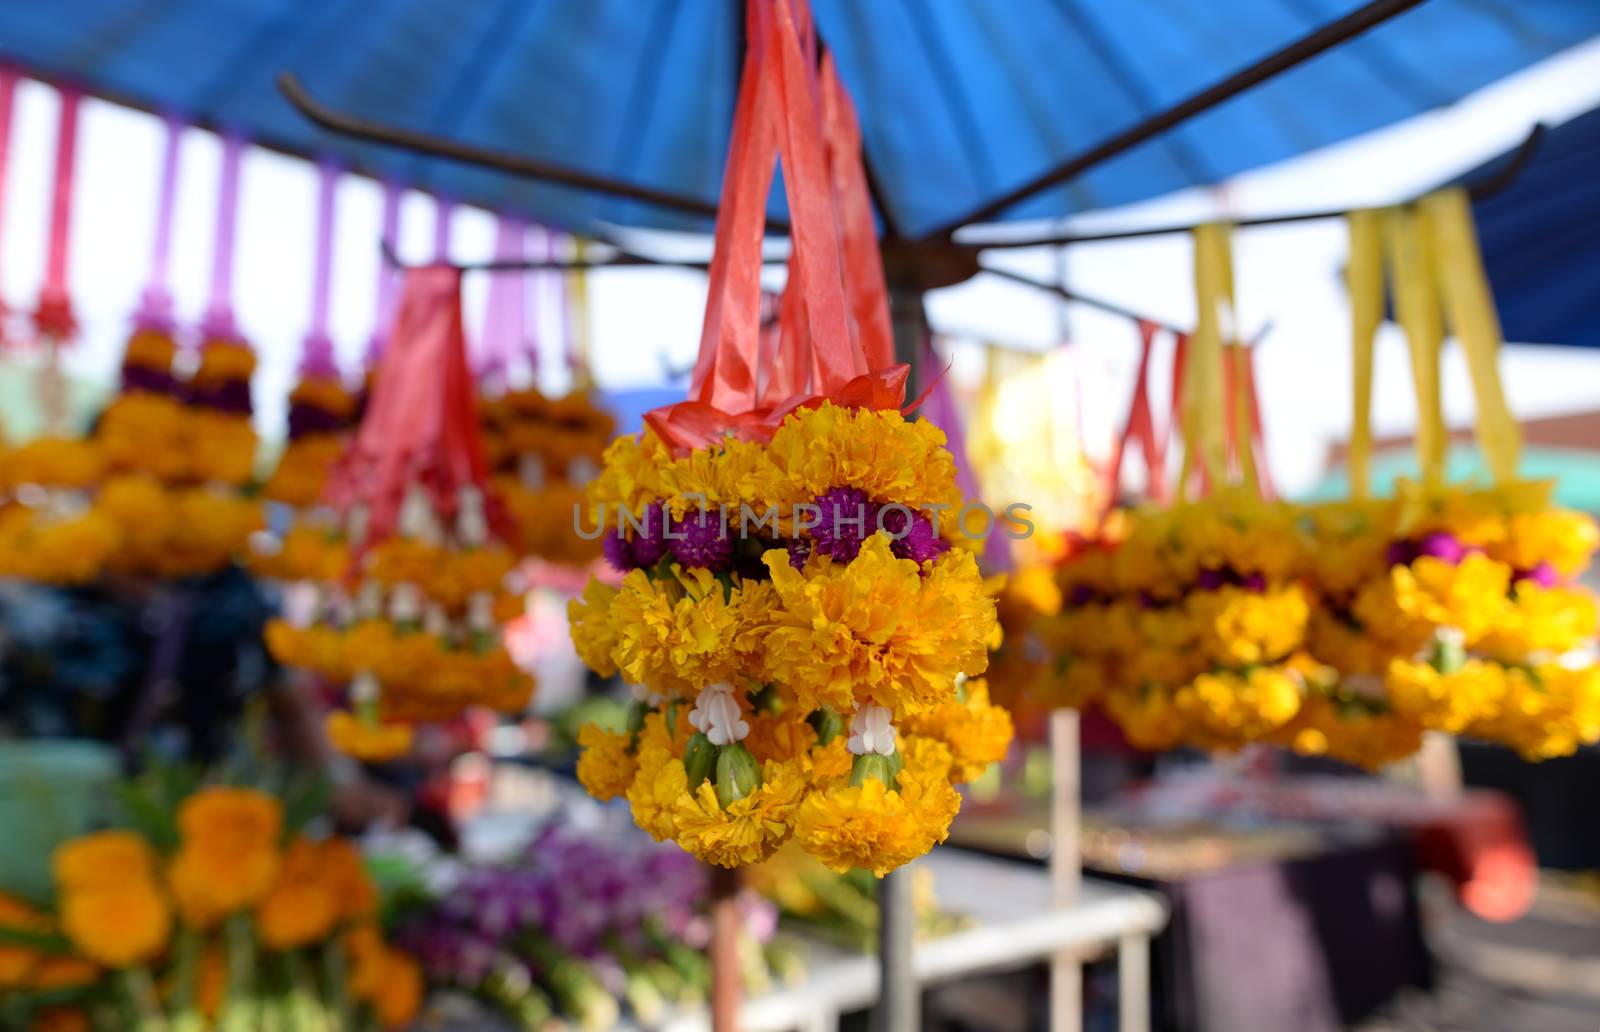 The garland is made of bright yellow flowers. Was hung for sale in the market, blurred background.